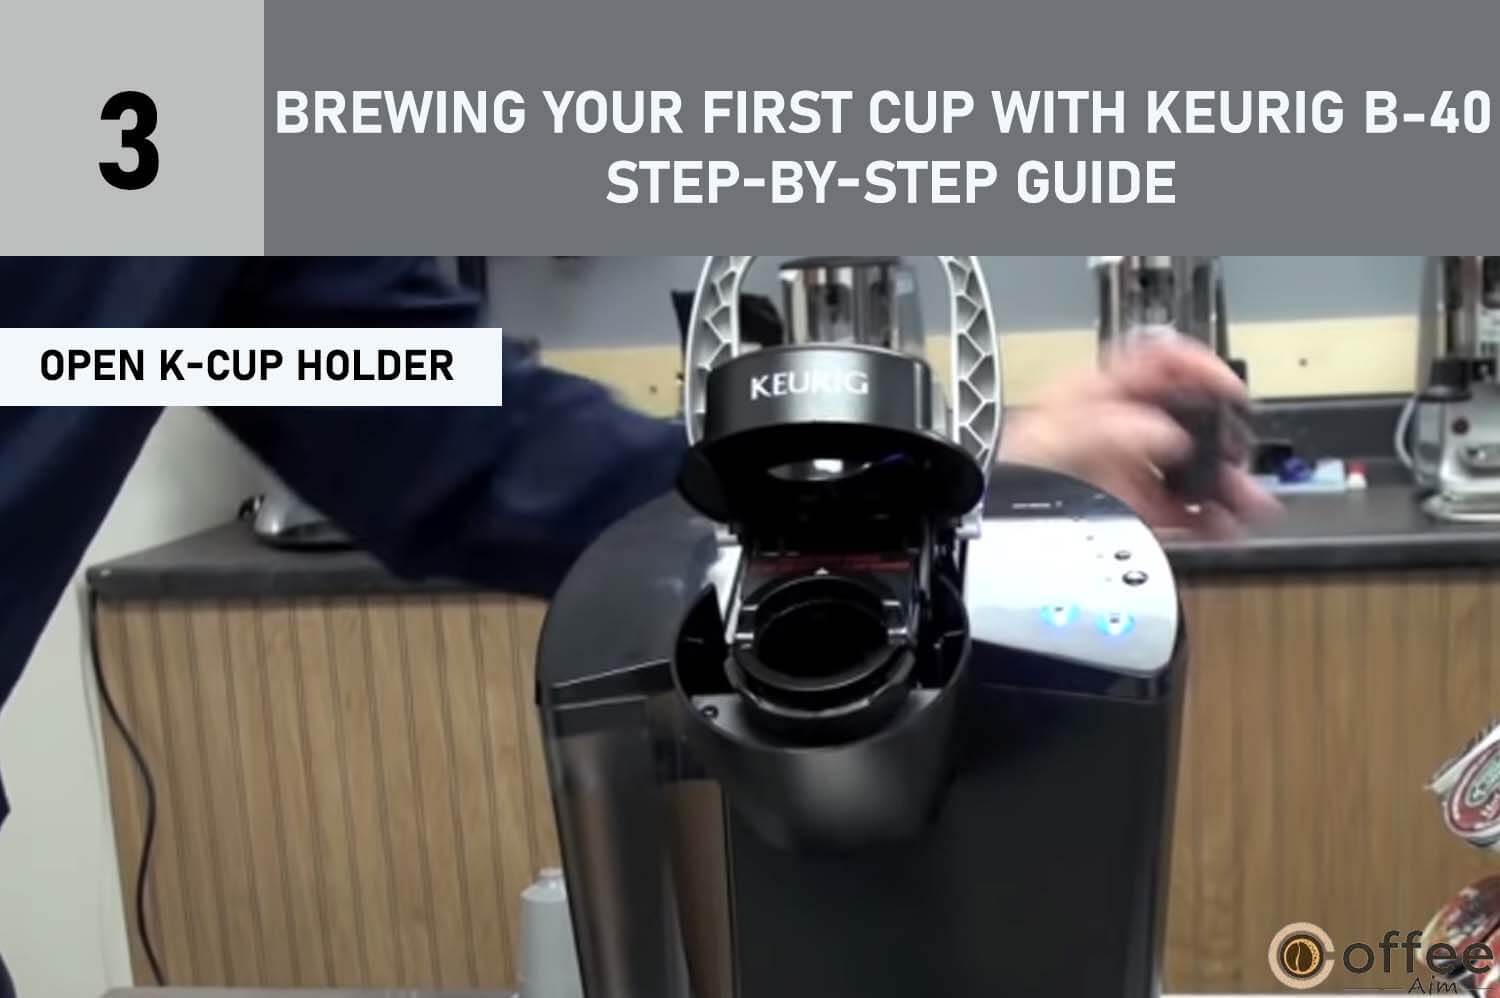 The provided image depicts the process of "Opening the K-Cup Holder," a pivotal step in the comprehensive guide titled "Brewing Your First Cup with Keurig B-40 - Step-by-Step Guide," which is a part of the informative article detailing the usage of the Keurig B-40 coffee maker. This visual representation elucidates the precise action required to access the K-Cup holder, an essential prelude to successfully utilizing the Keurig B-40 for brewing your initial cup of coffee.